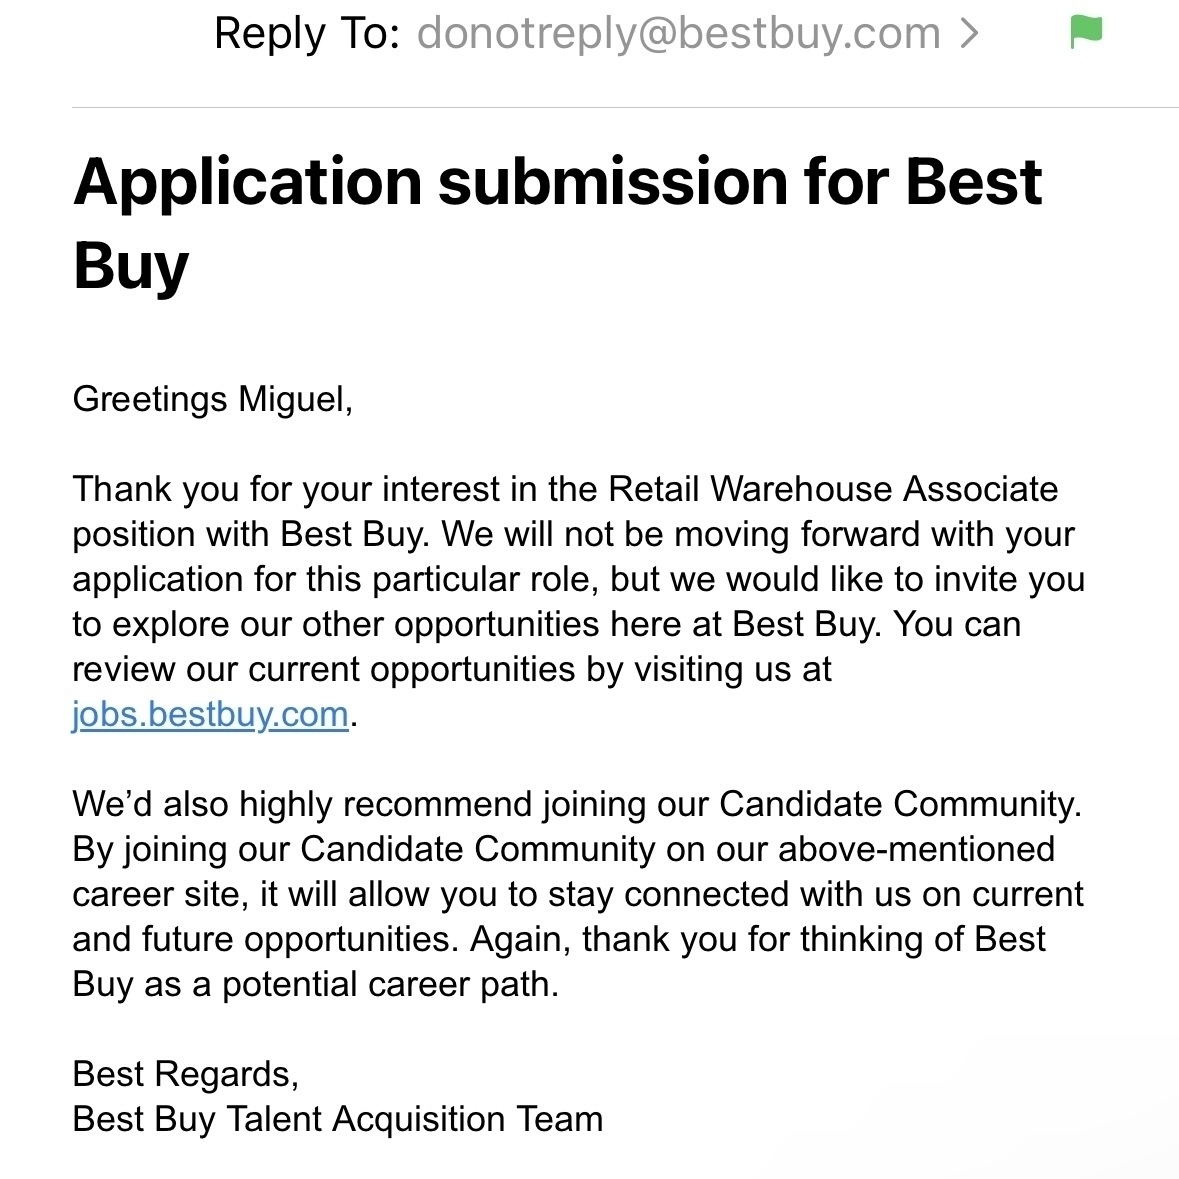 Reply To: donotreply@bestbuy.com >&10;Application submission for Best&10;Buy&10;Greetings Miguel,&10;Thank you for your interest in the Retail Warehouse Associate position with Best Buy. We will not be moving forward with your application for this particular role, but we would like to invite you to explore our other opportunities here at Best Buy. You can review our current opportunities by visiting us at jobs.bestbuy.com.&10;We'd also highly recommend joining our Candidate Community.&10;By joining our Candidate Community on our above-mentioned career site, it will allow you to stay connected with us on current and future opportunities. Again, thank you for thinking of Best Buy as a potential career path.&10;Best Regards,&10;Best Buy Talent Acquisition Team